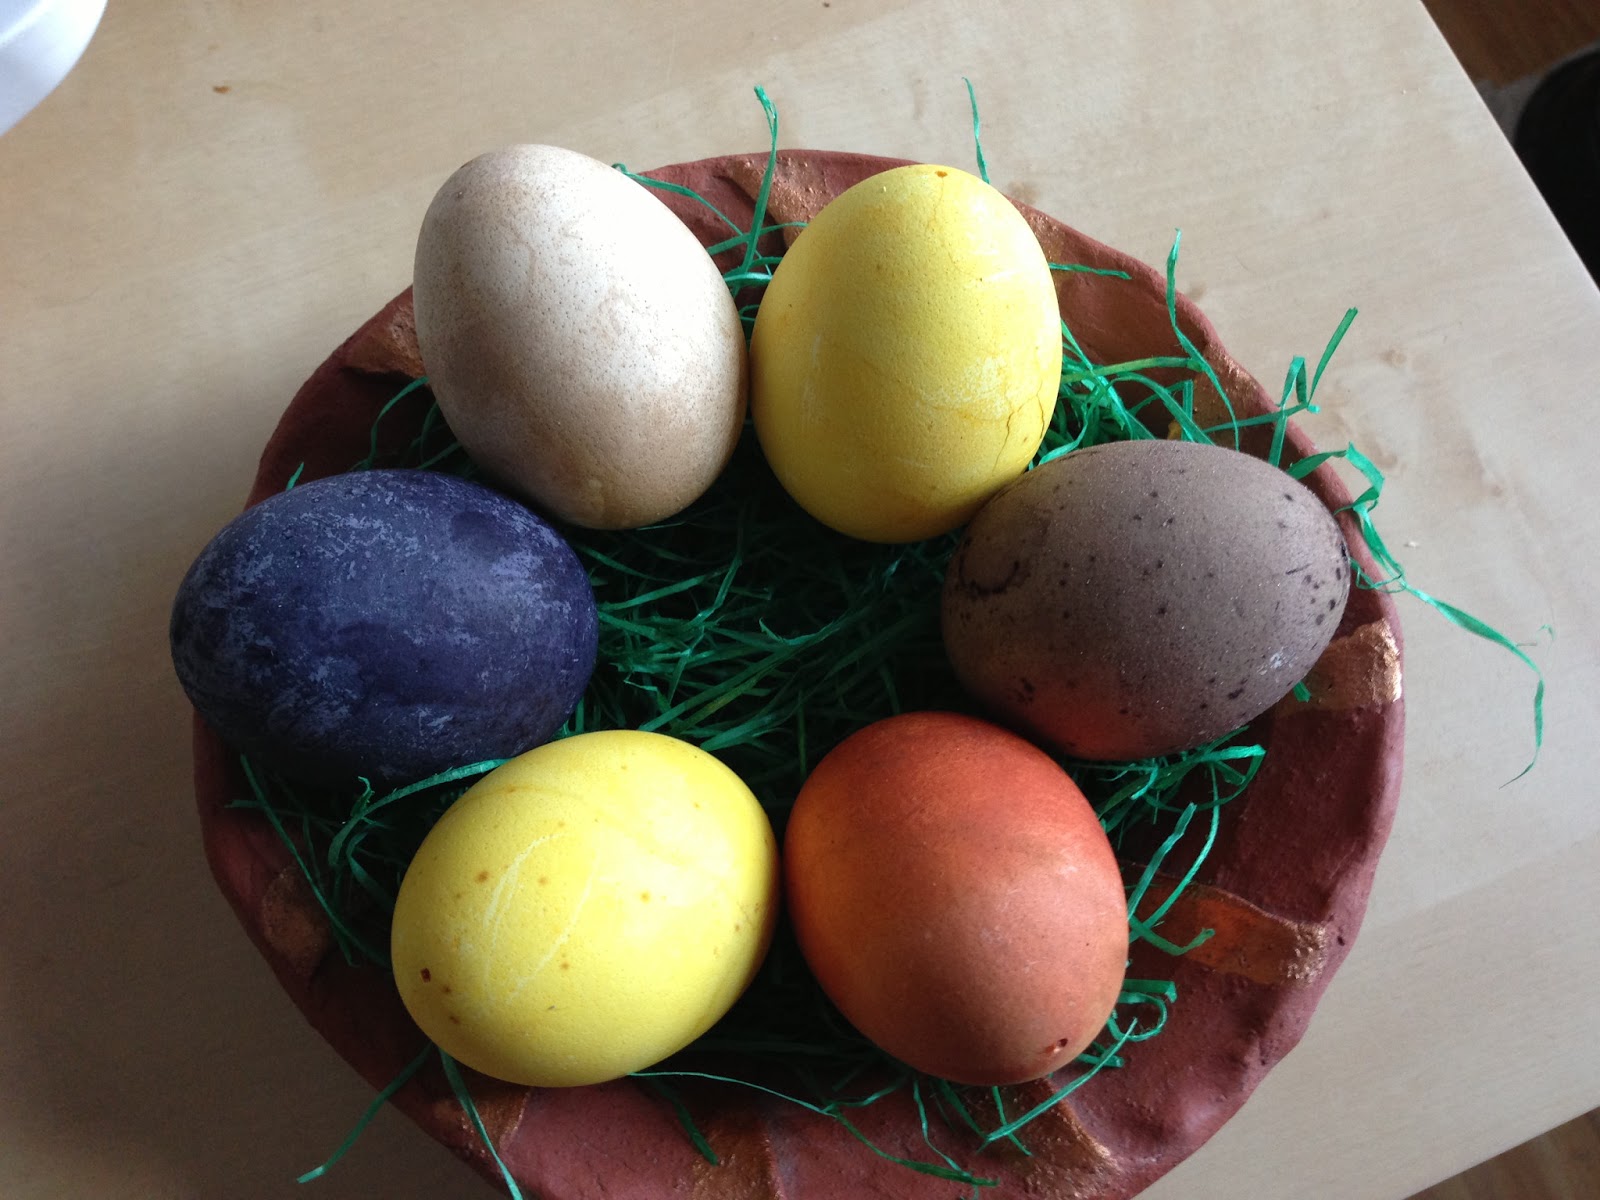 Eggs dyeing in natural color . Clockwise from the top right we have turmeric (yellow), red wine (purple-ish), onion skin (brick red), another turmeric, blue berry (dark blue), and last and kind of least: paprika powder.